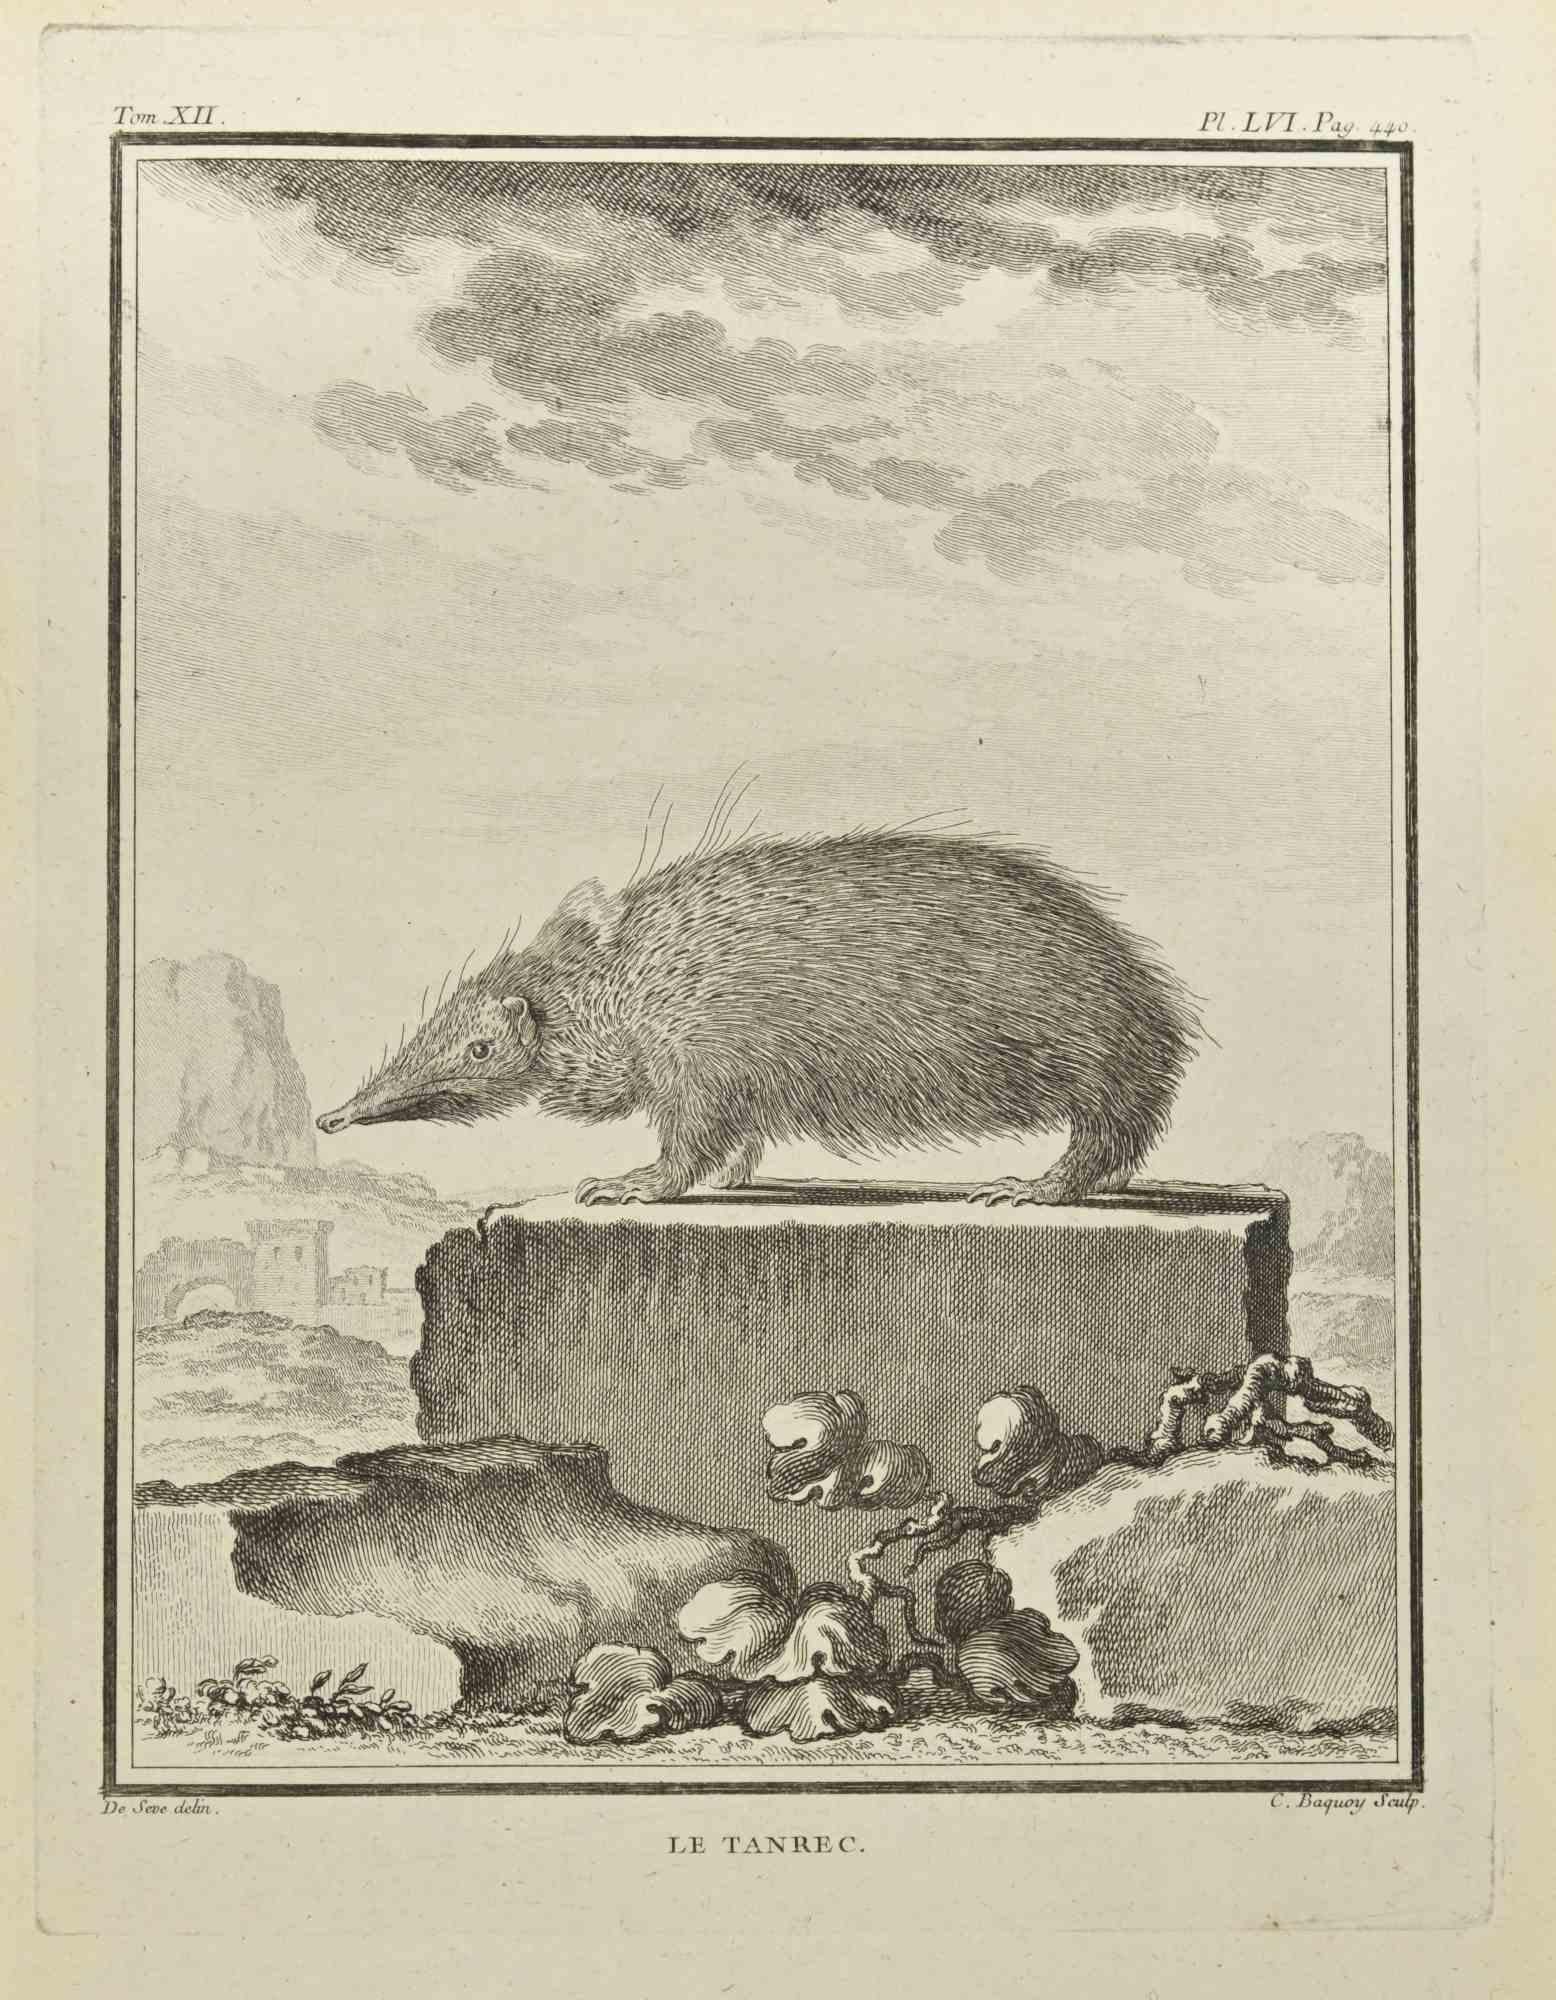 Le Tendrac is an etching realized by Jean Charles Baquoy in 1771.

It belongs to the suite "Histoire Naturelle de Buffon".

The Artist's signature is engraved lower right.

Good conditions